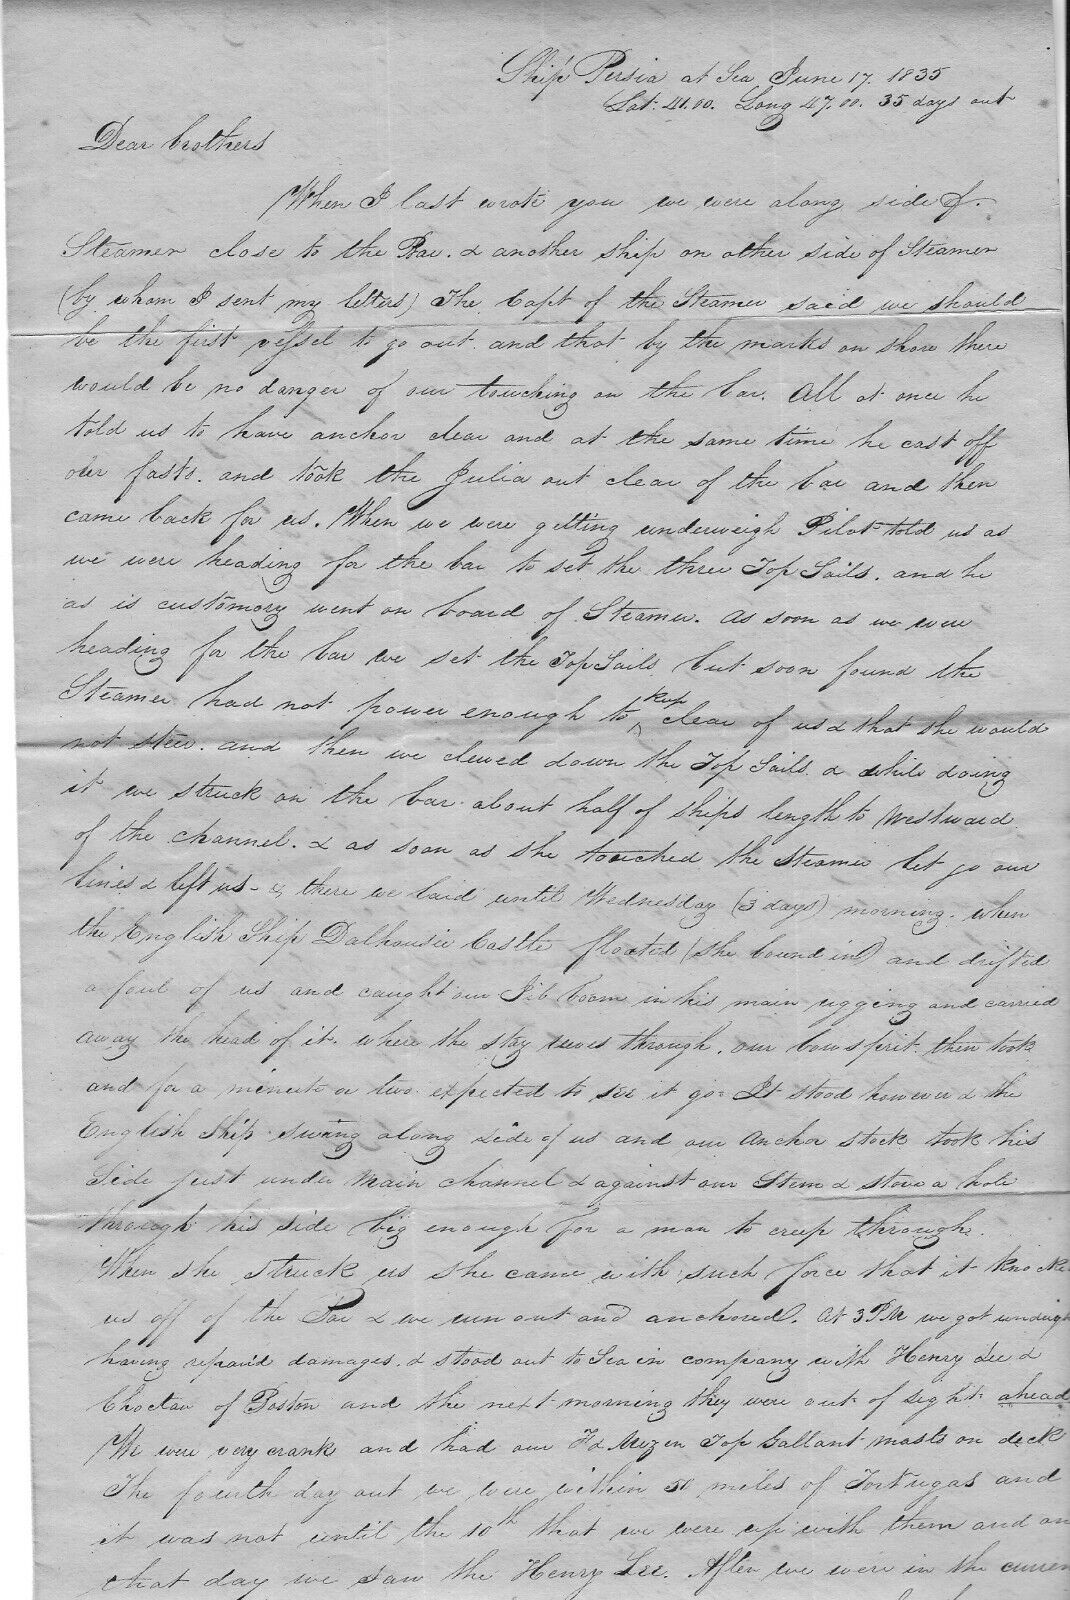 [Maritime] Ship’s Captain Joshua Hale Writes Of Damages To Ship Persia In 1835